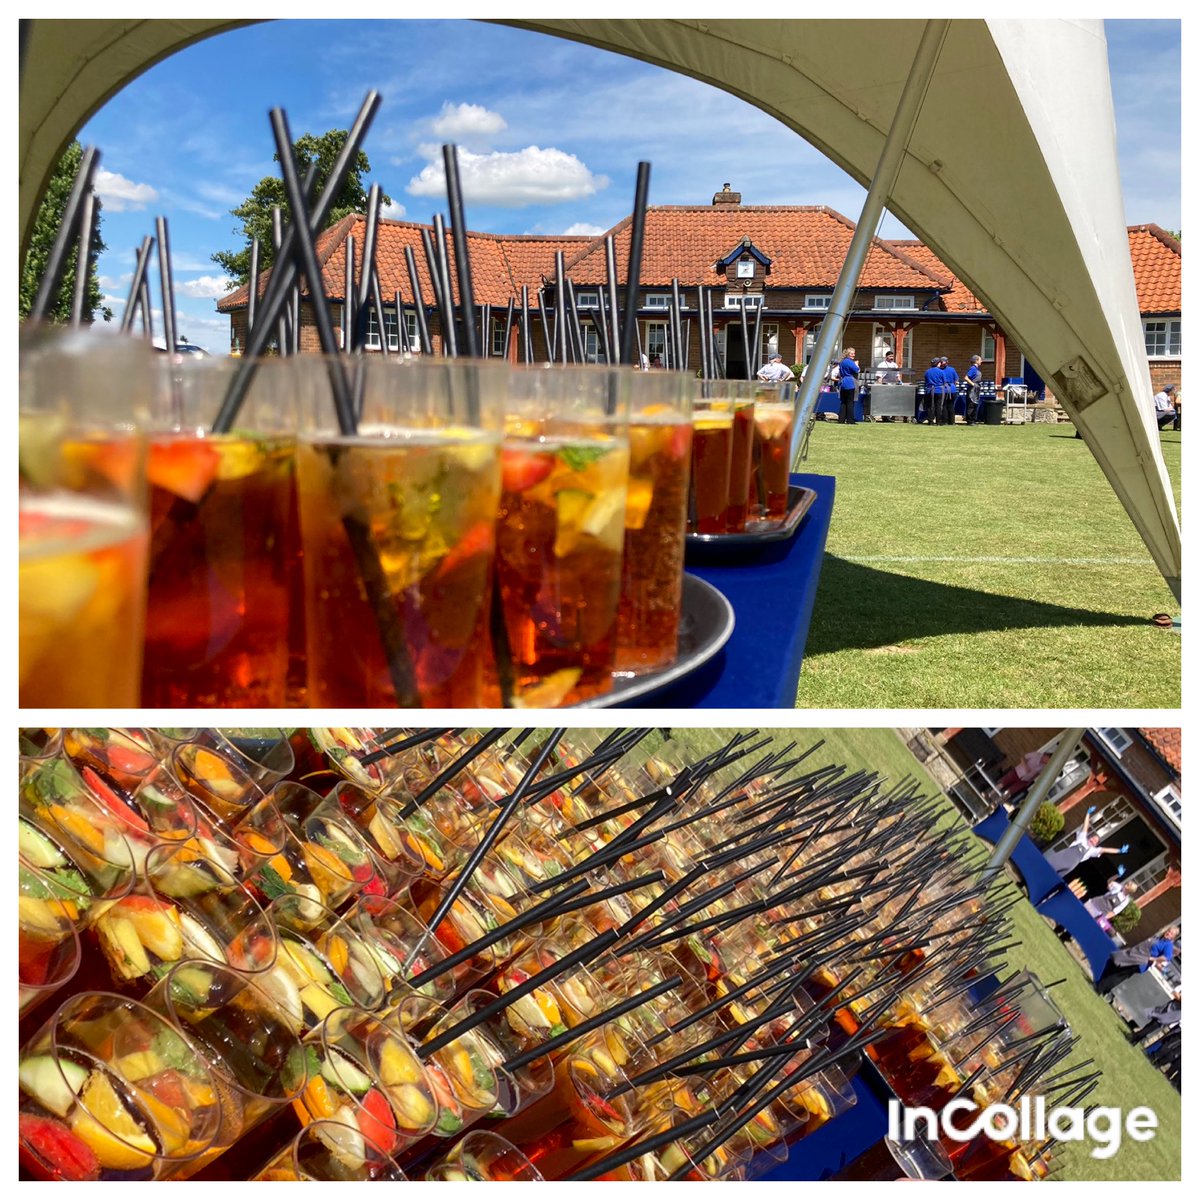 Prize giving day for the senior school of @PockSchool today. The sun was shining and the refreshments glowed